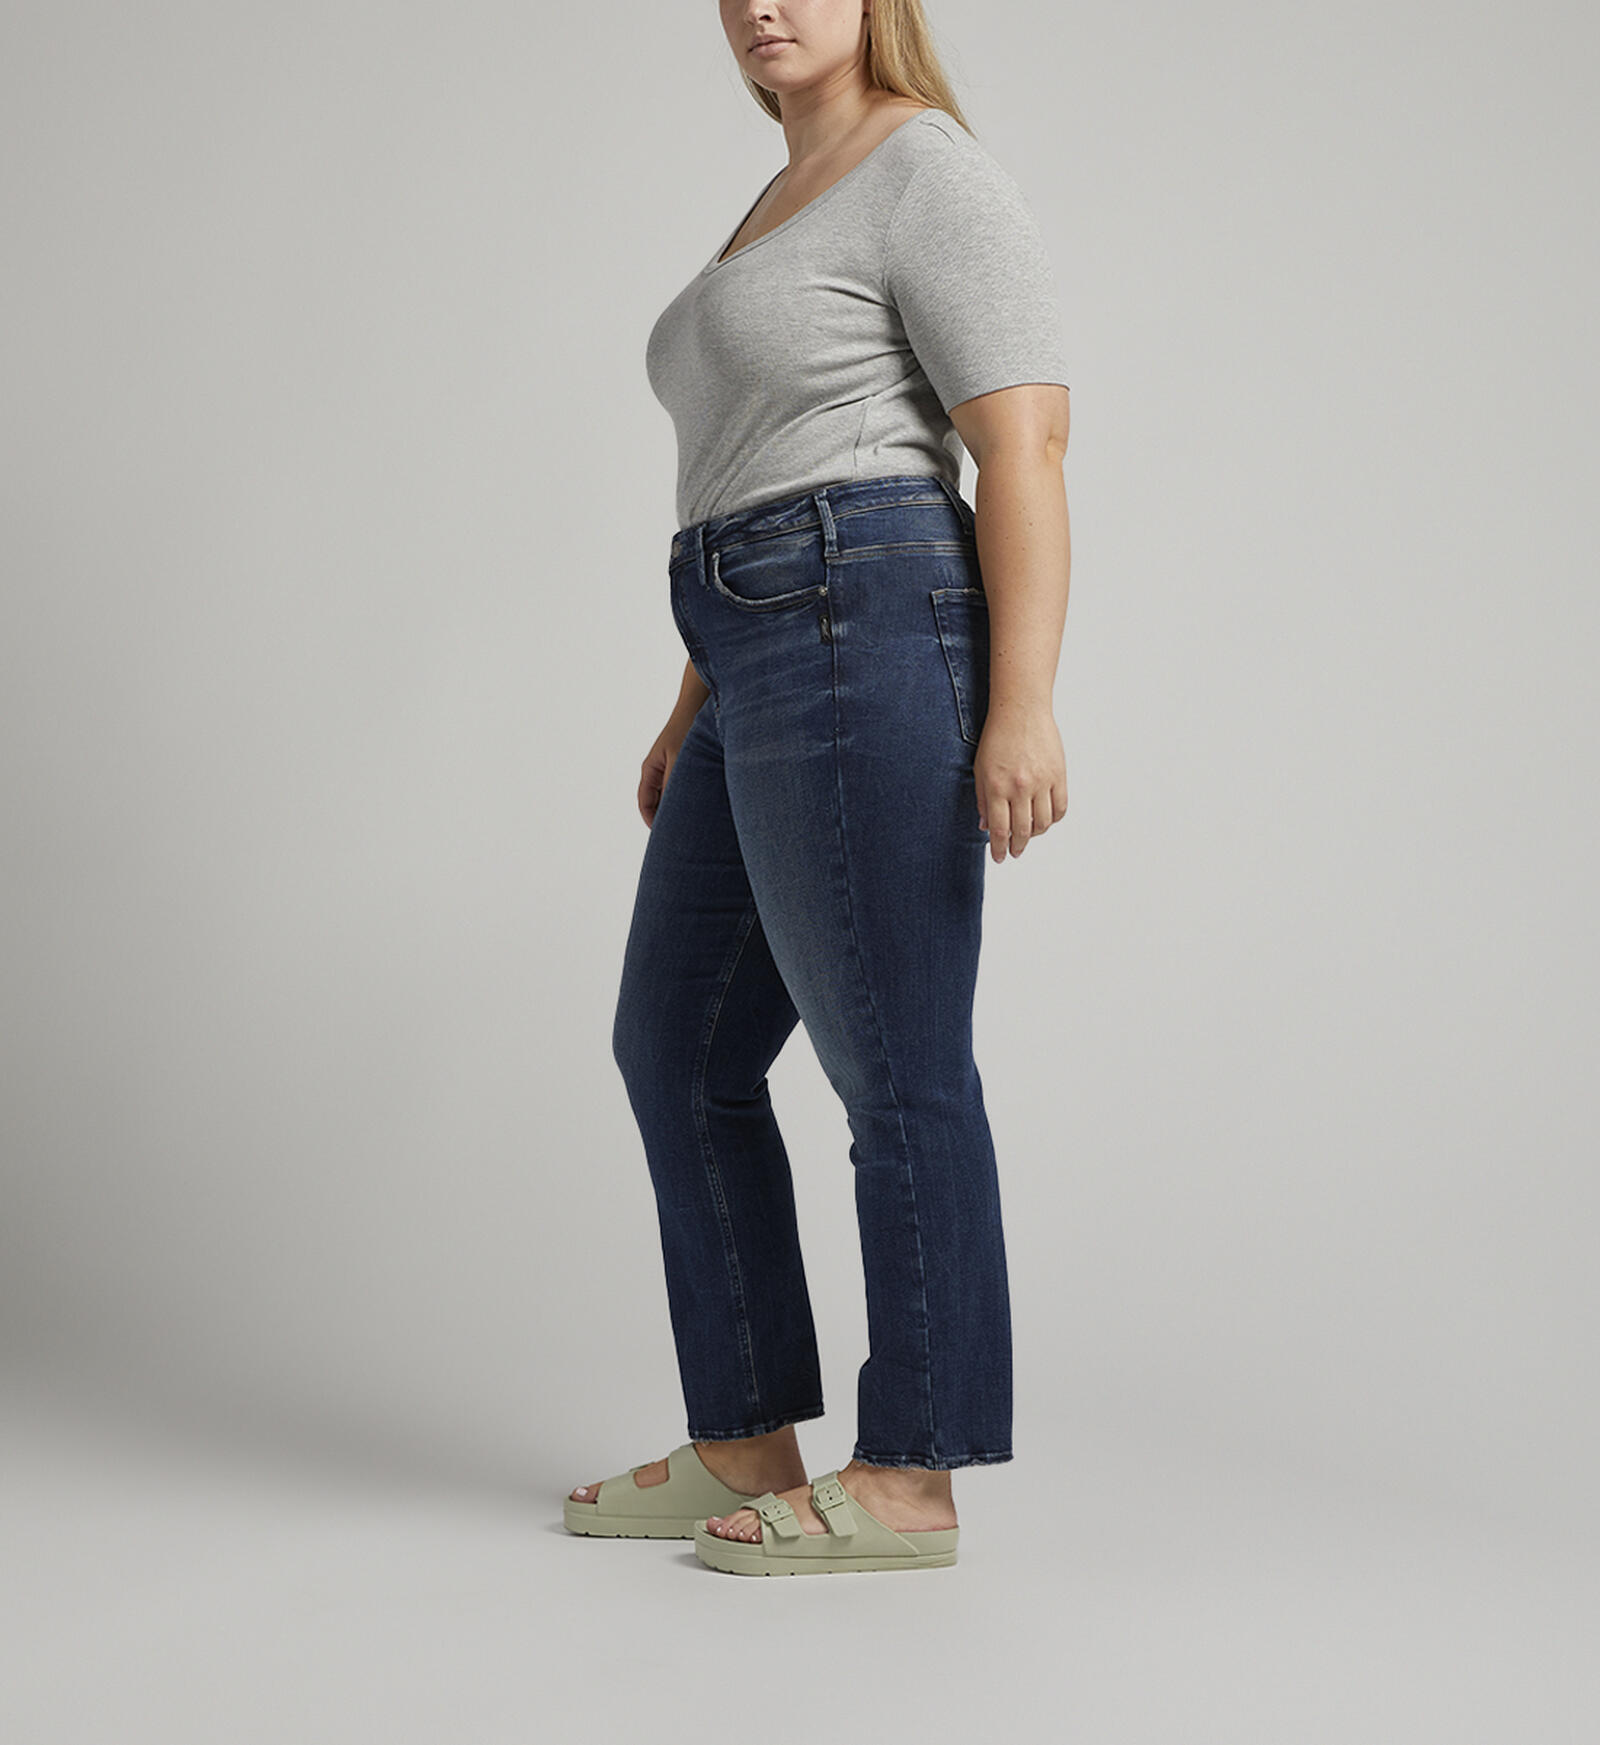 Buy Infinite Fit High Rise Straight Leg Jeans Plus Size for USD 68.00